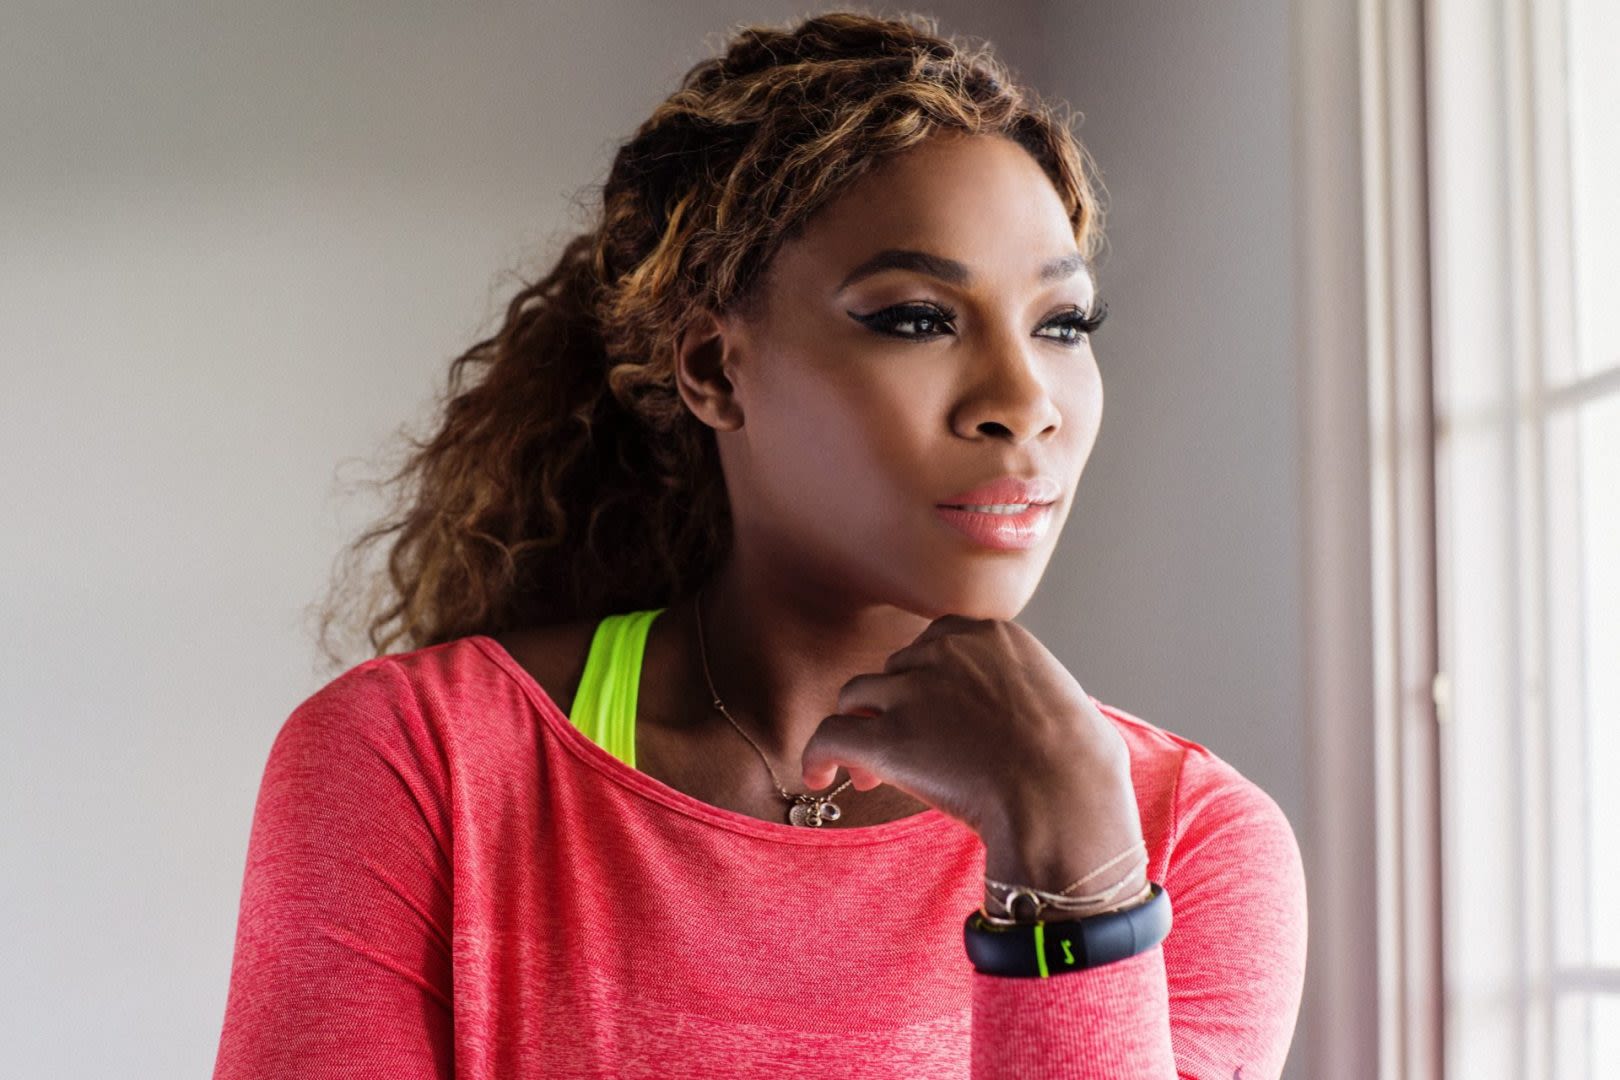 Serena Williams faces criticism over appearance